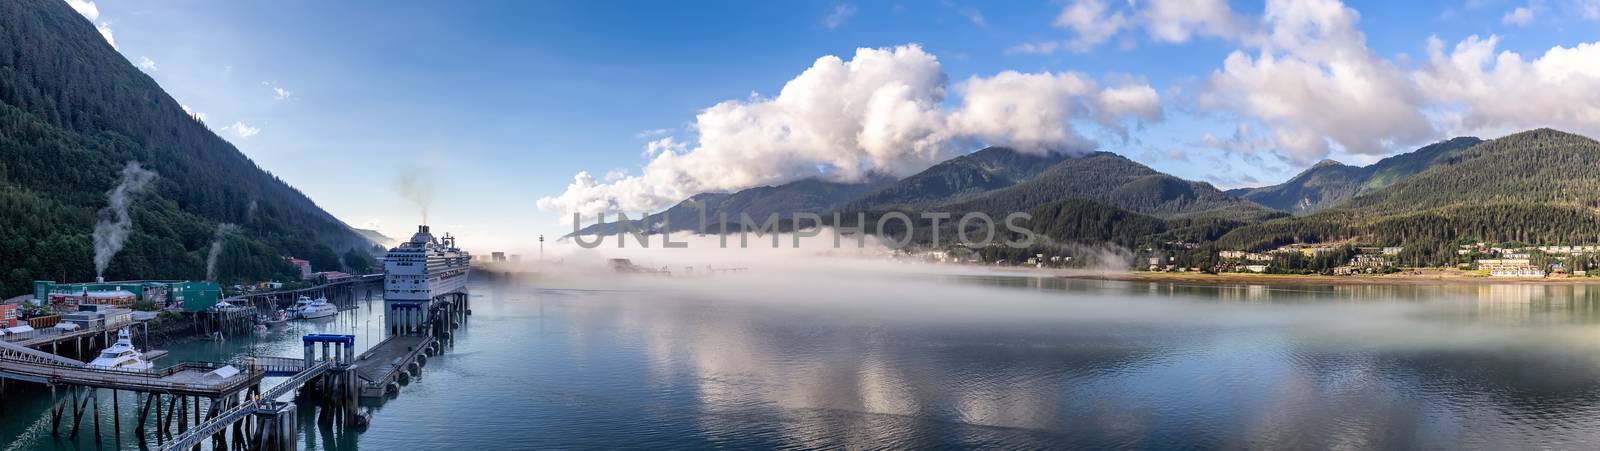 Panoramic shot of port of Juneau and mountains covered with clouds and fog in Gastineau Channel, Alaska. Cruise ship and boats docked in the port. Blue cloudy sky as a background by DamantisZ